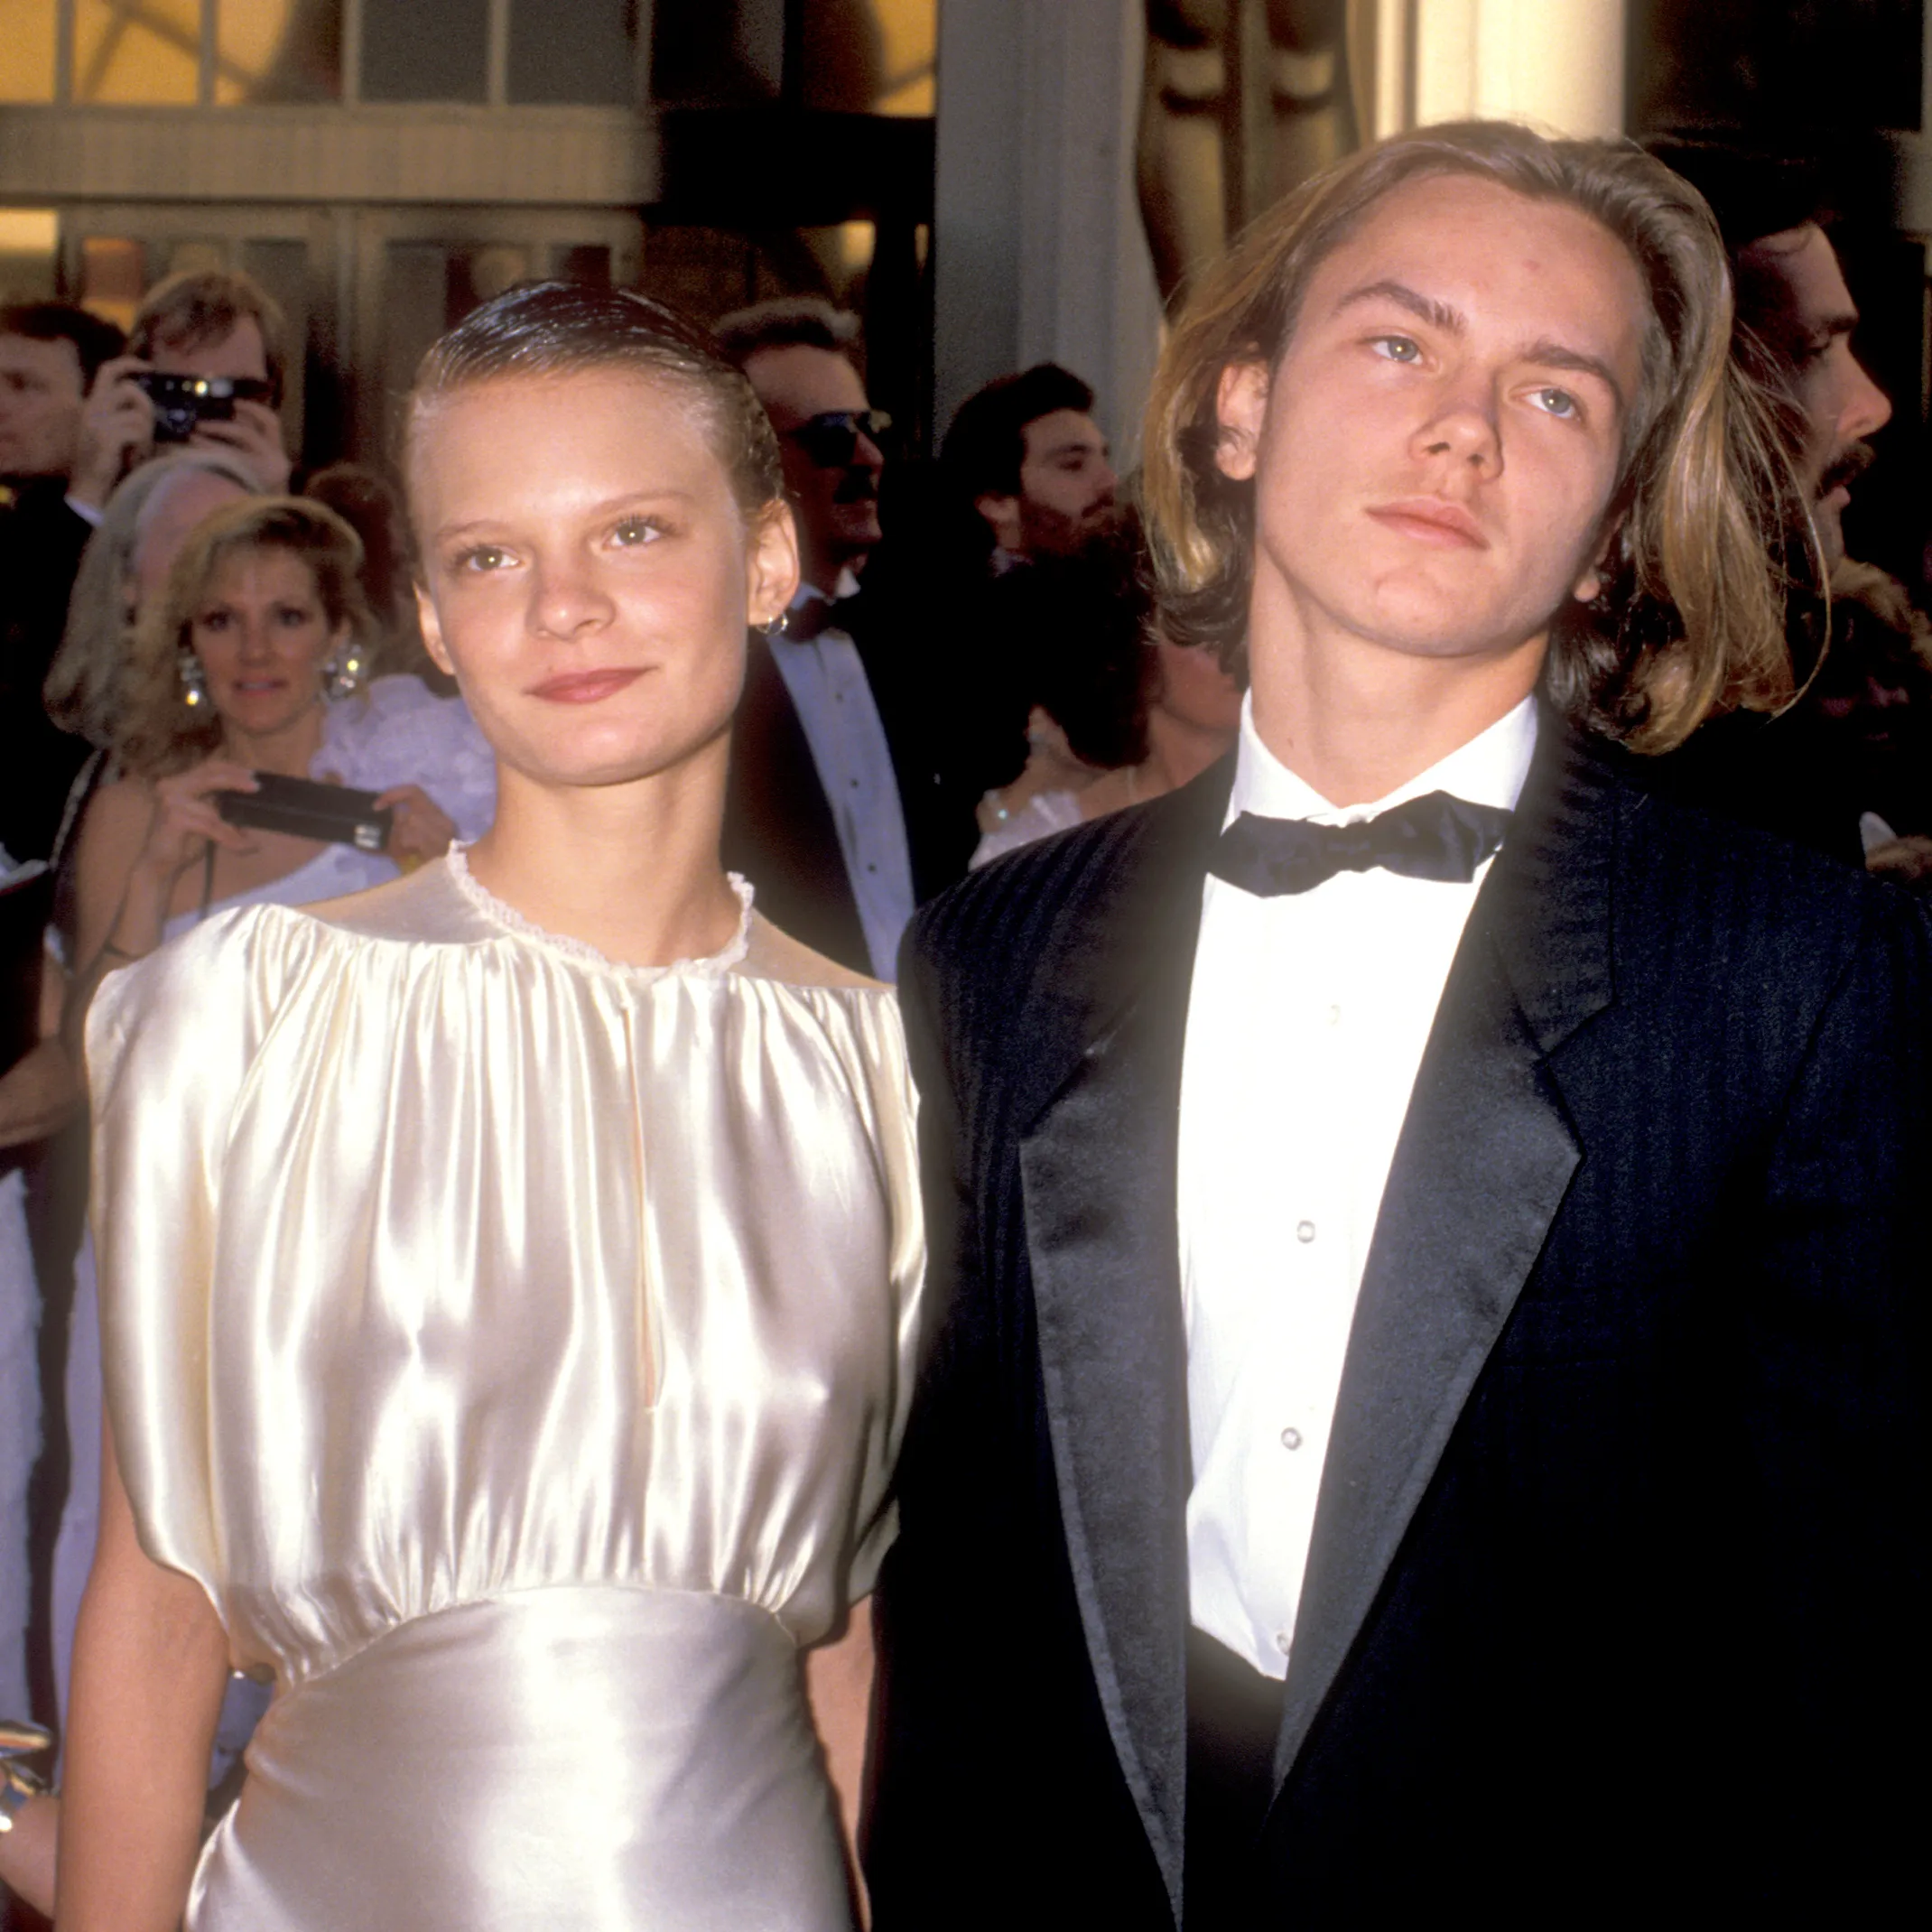 River Phoenix with his ex-girlfriend, Martha Plimpton, at the 61st Annual Academy Awards